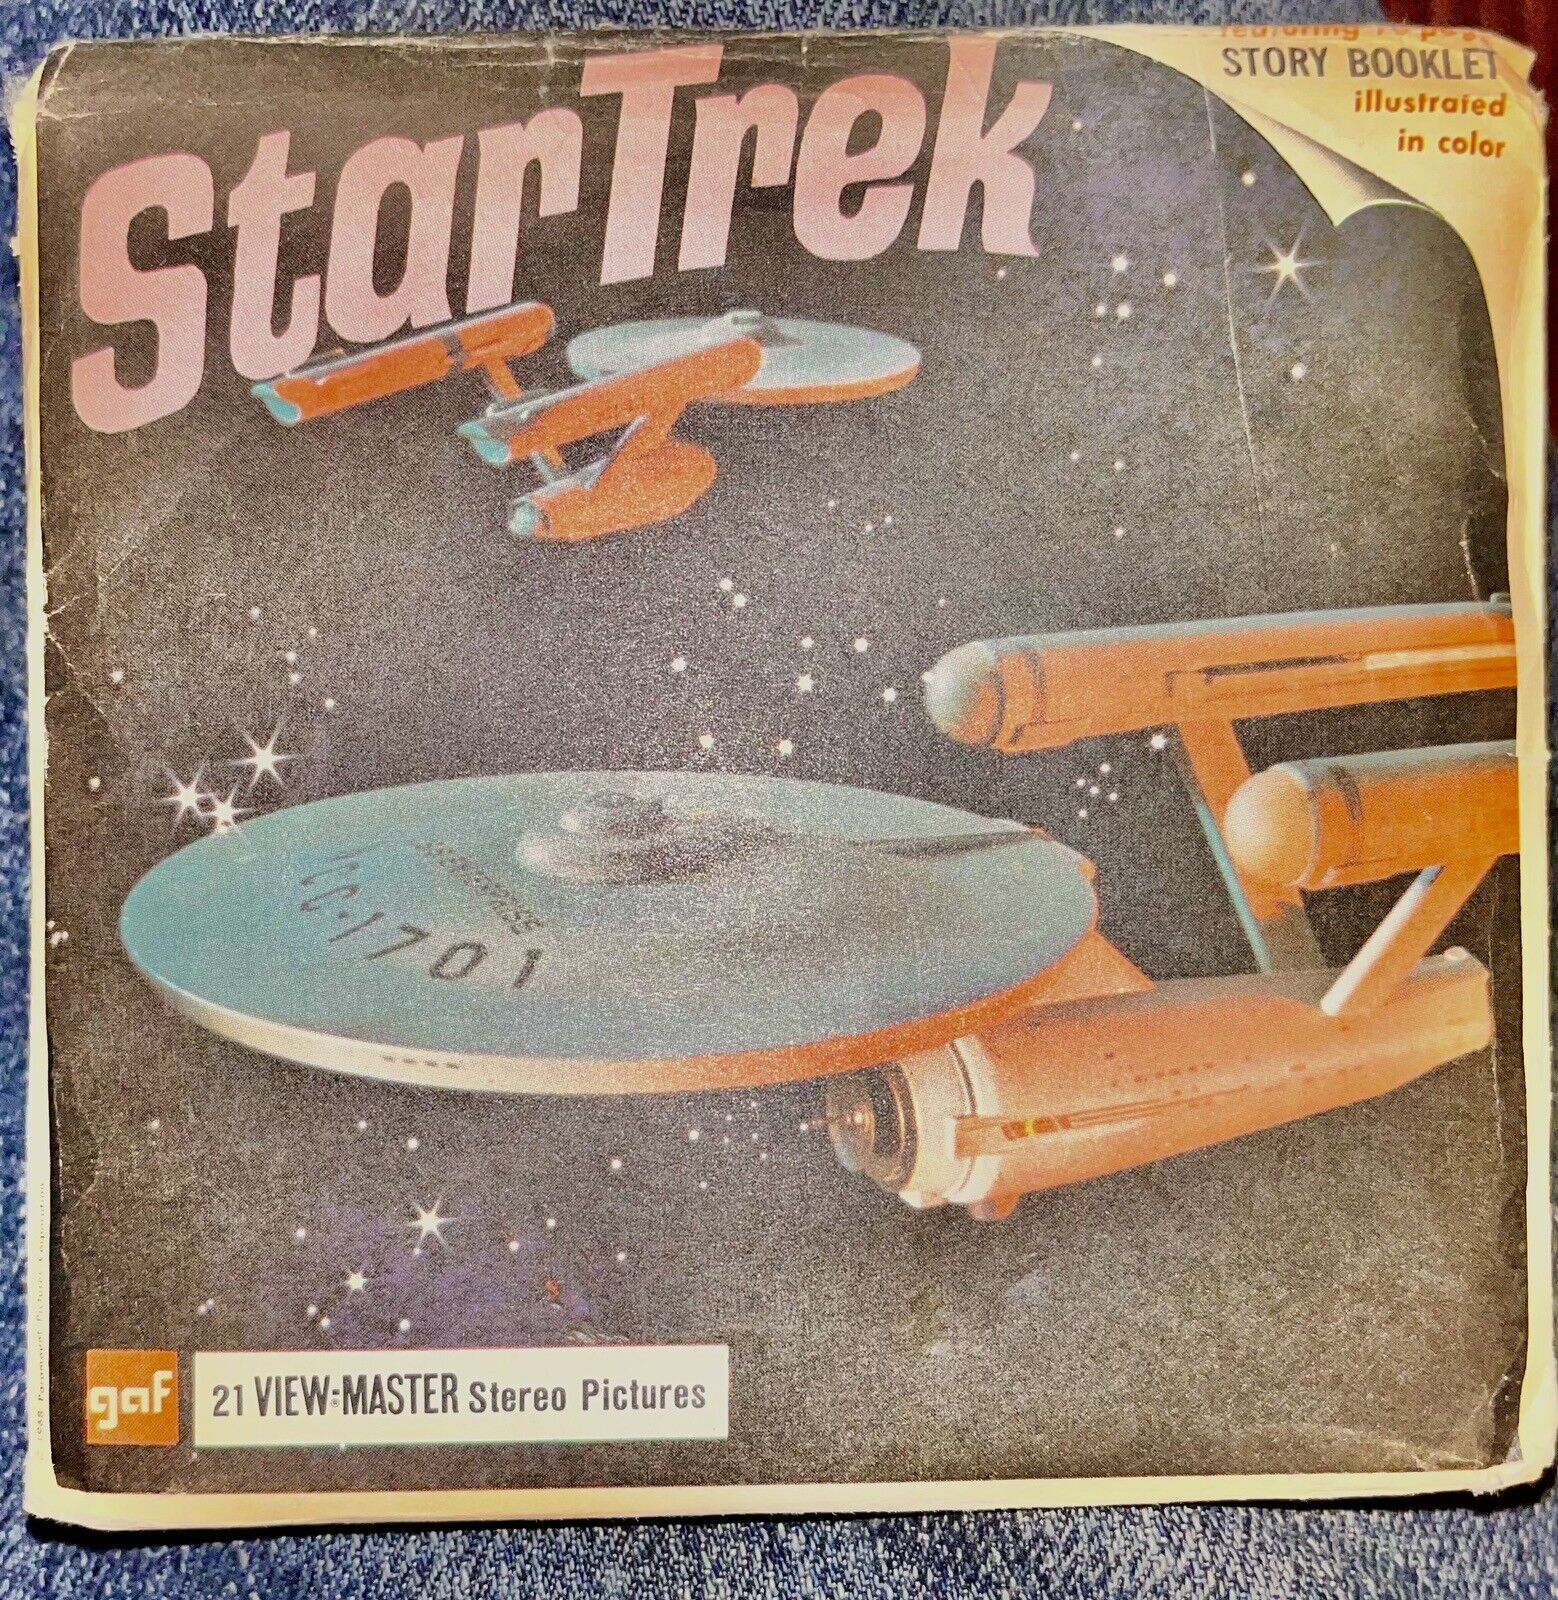 Star Trek View Master 3 Reels, The Omega Glory TV Show w/Book (c)1968 Paramount 